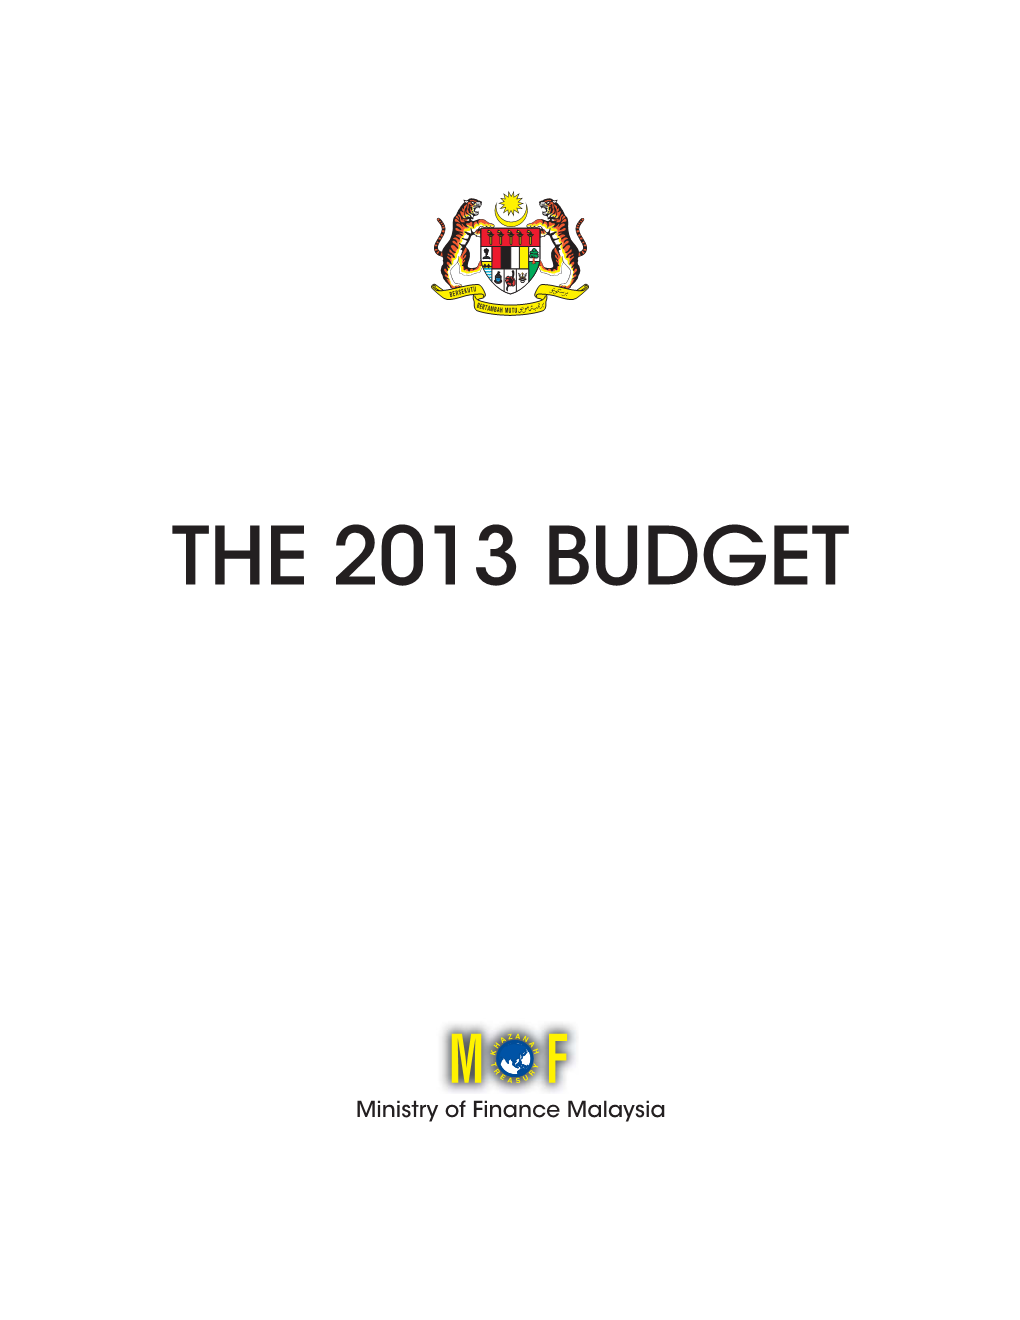 The 2013 Budget